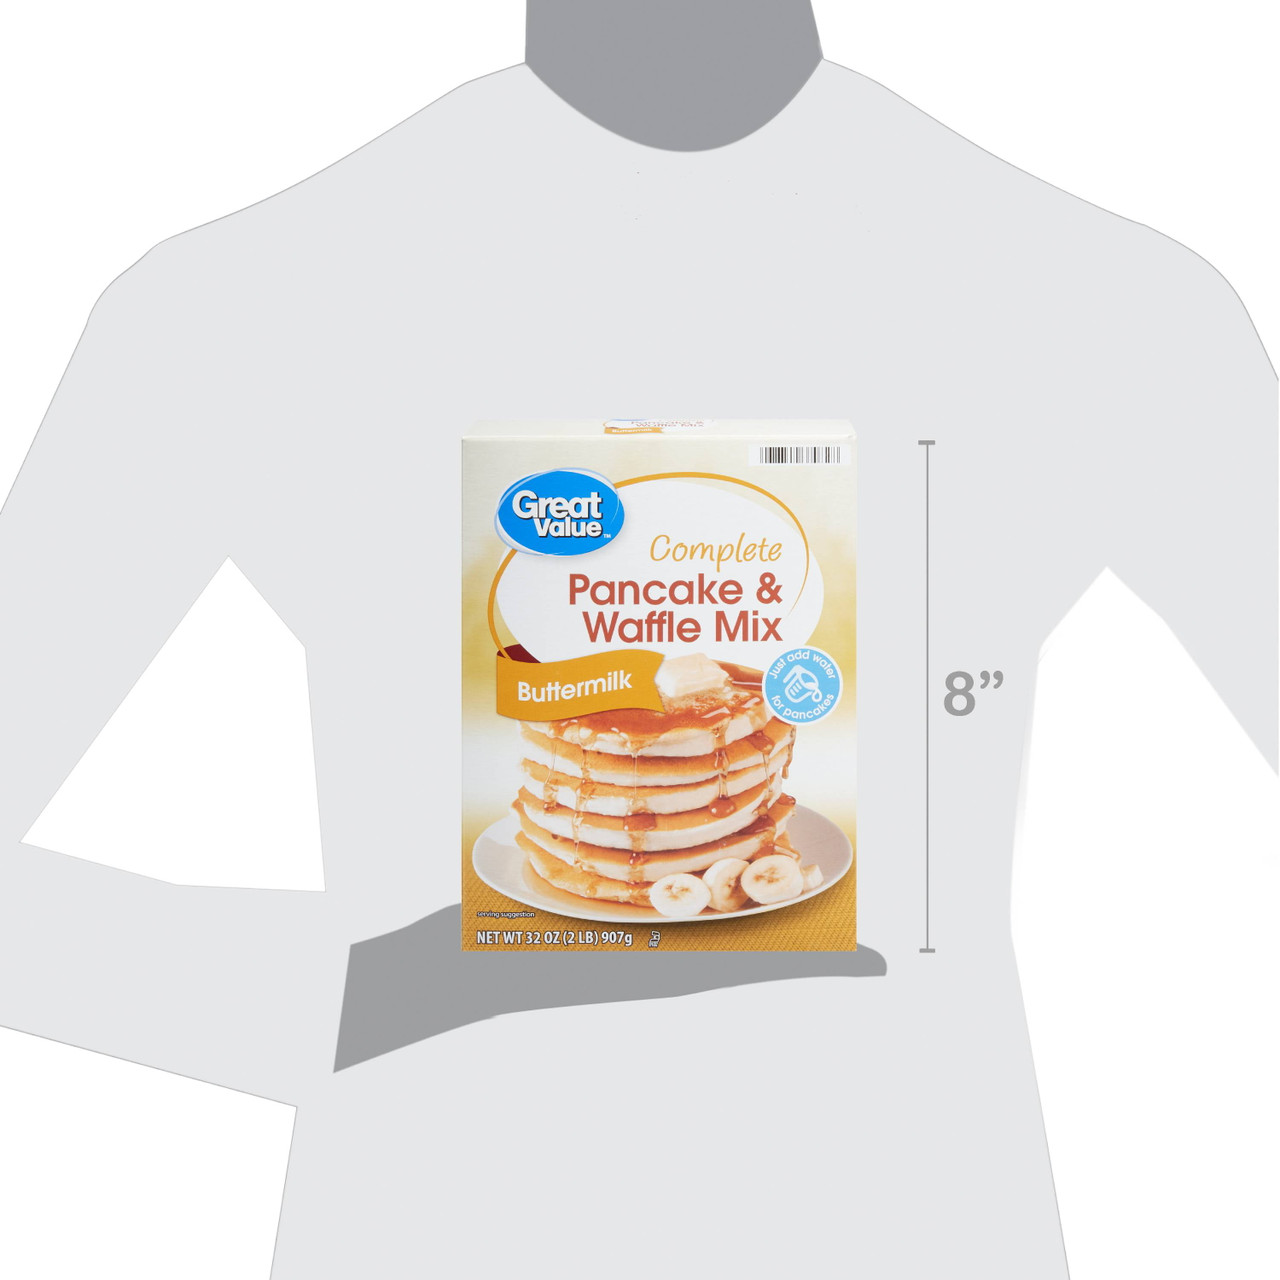 Great Value Complete Pancake & Waffle Mix, Buttermilk, 32 oz - *Pre-Order